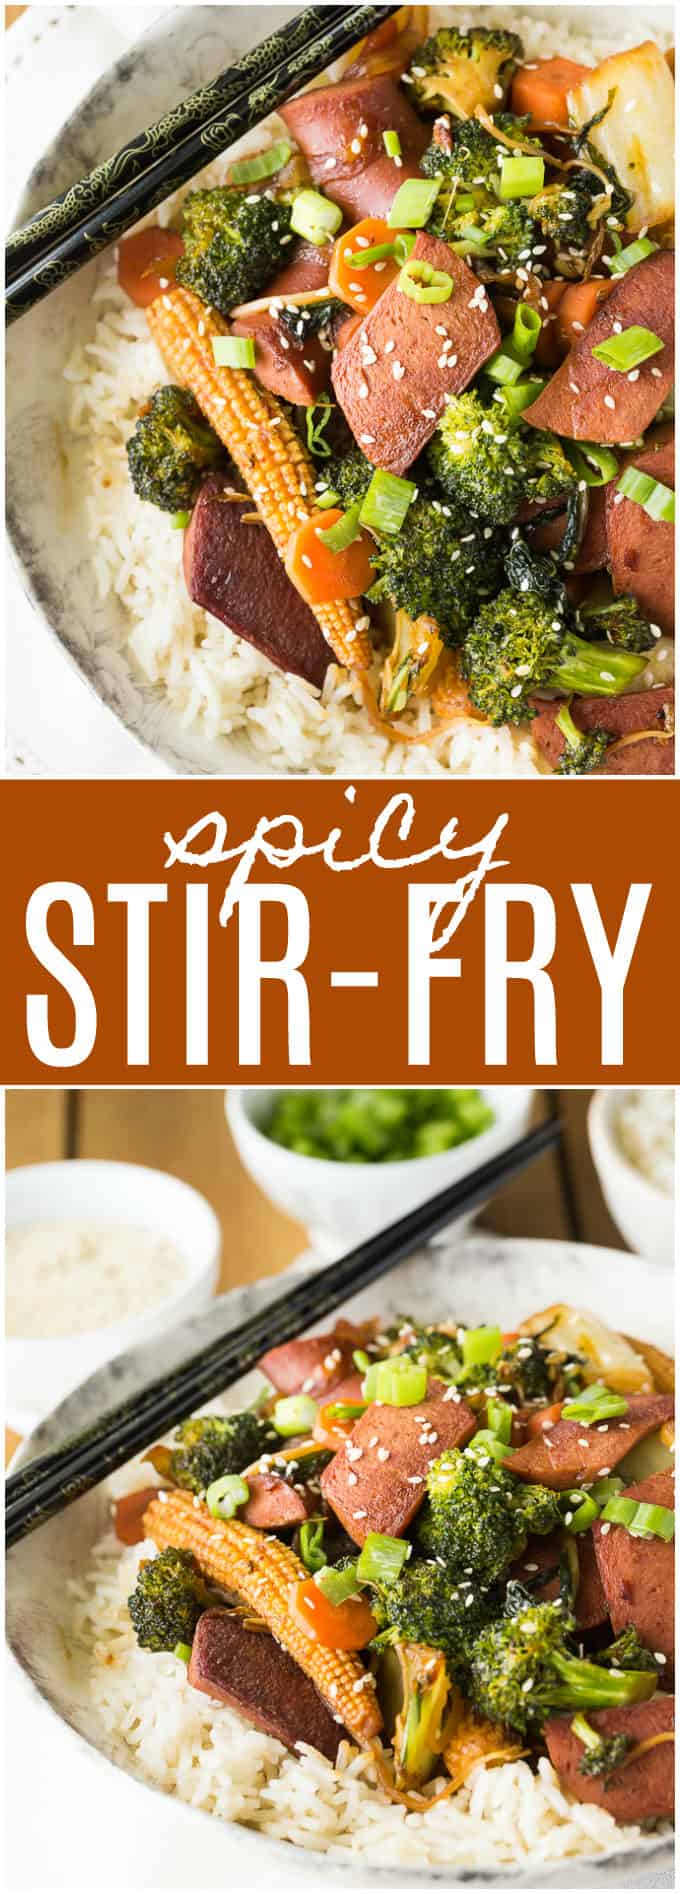 Spicy Stir-Fry - Spicy chicken frankfurters add an extra kick of fiery flavour to a stir-fried vegetable medley.